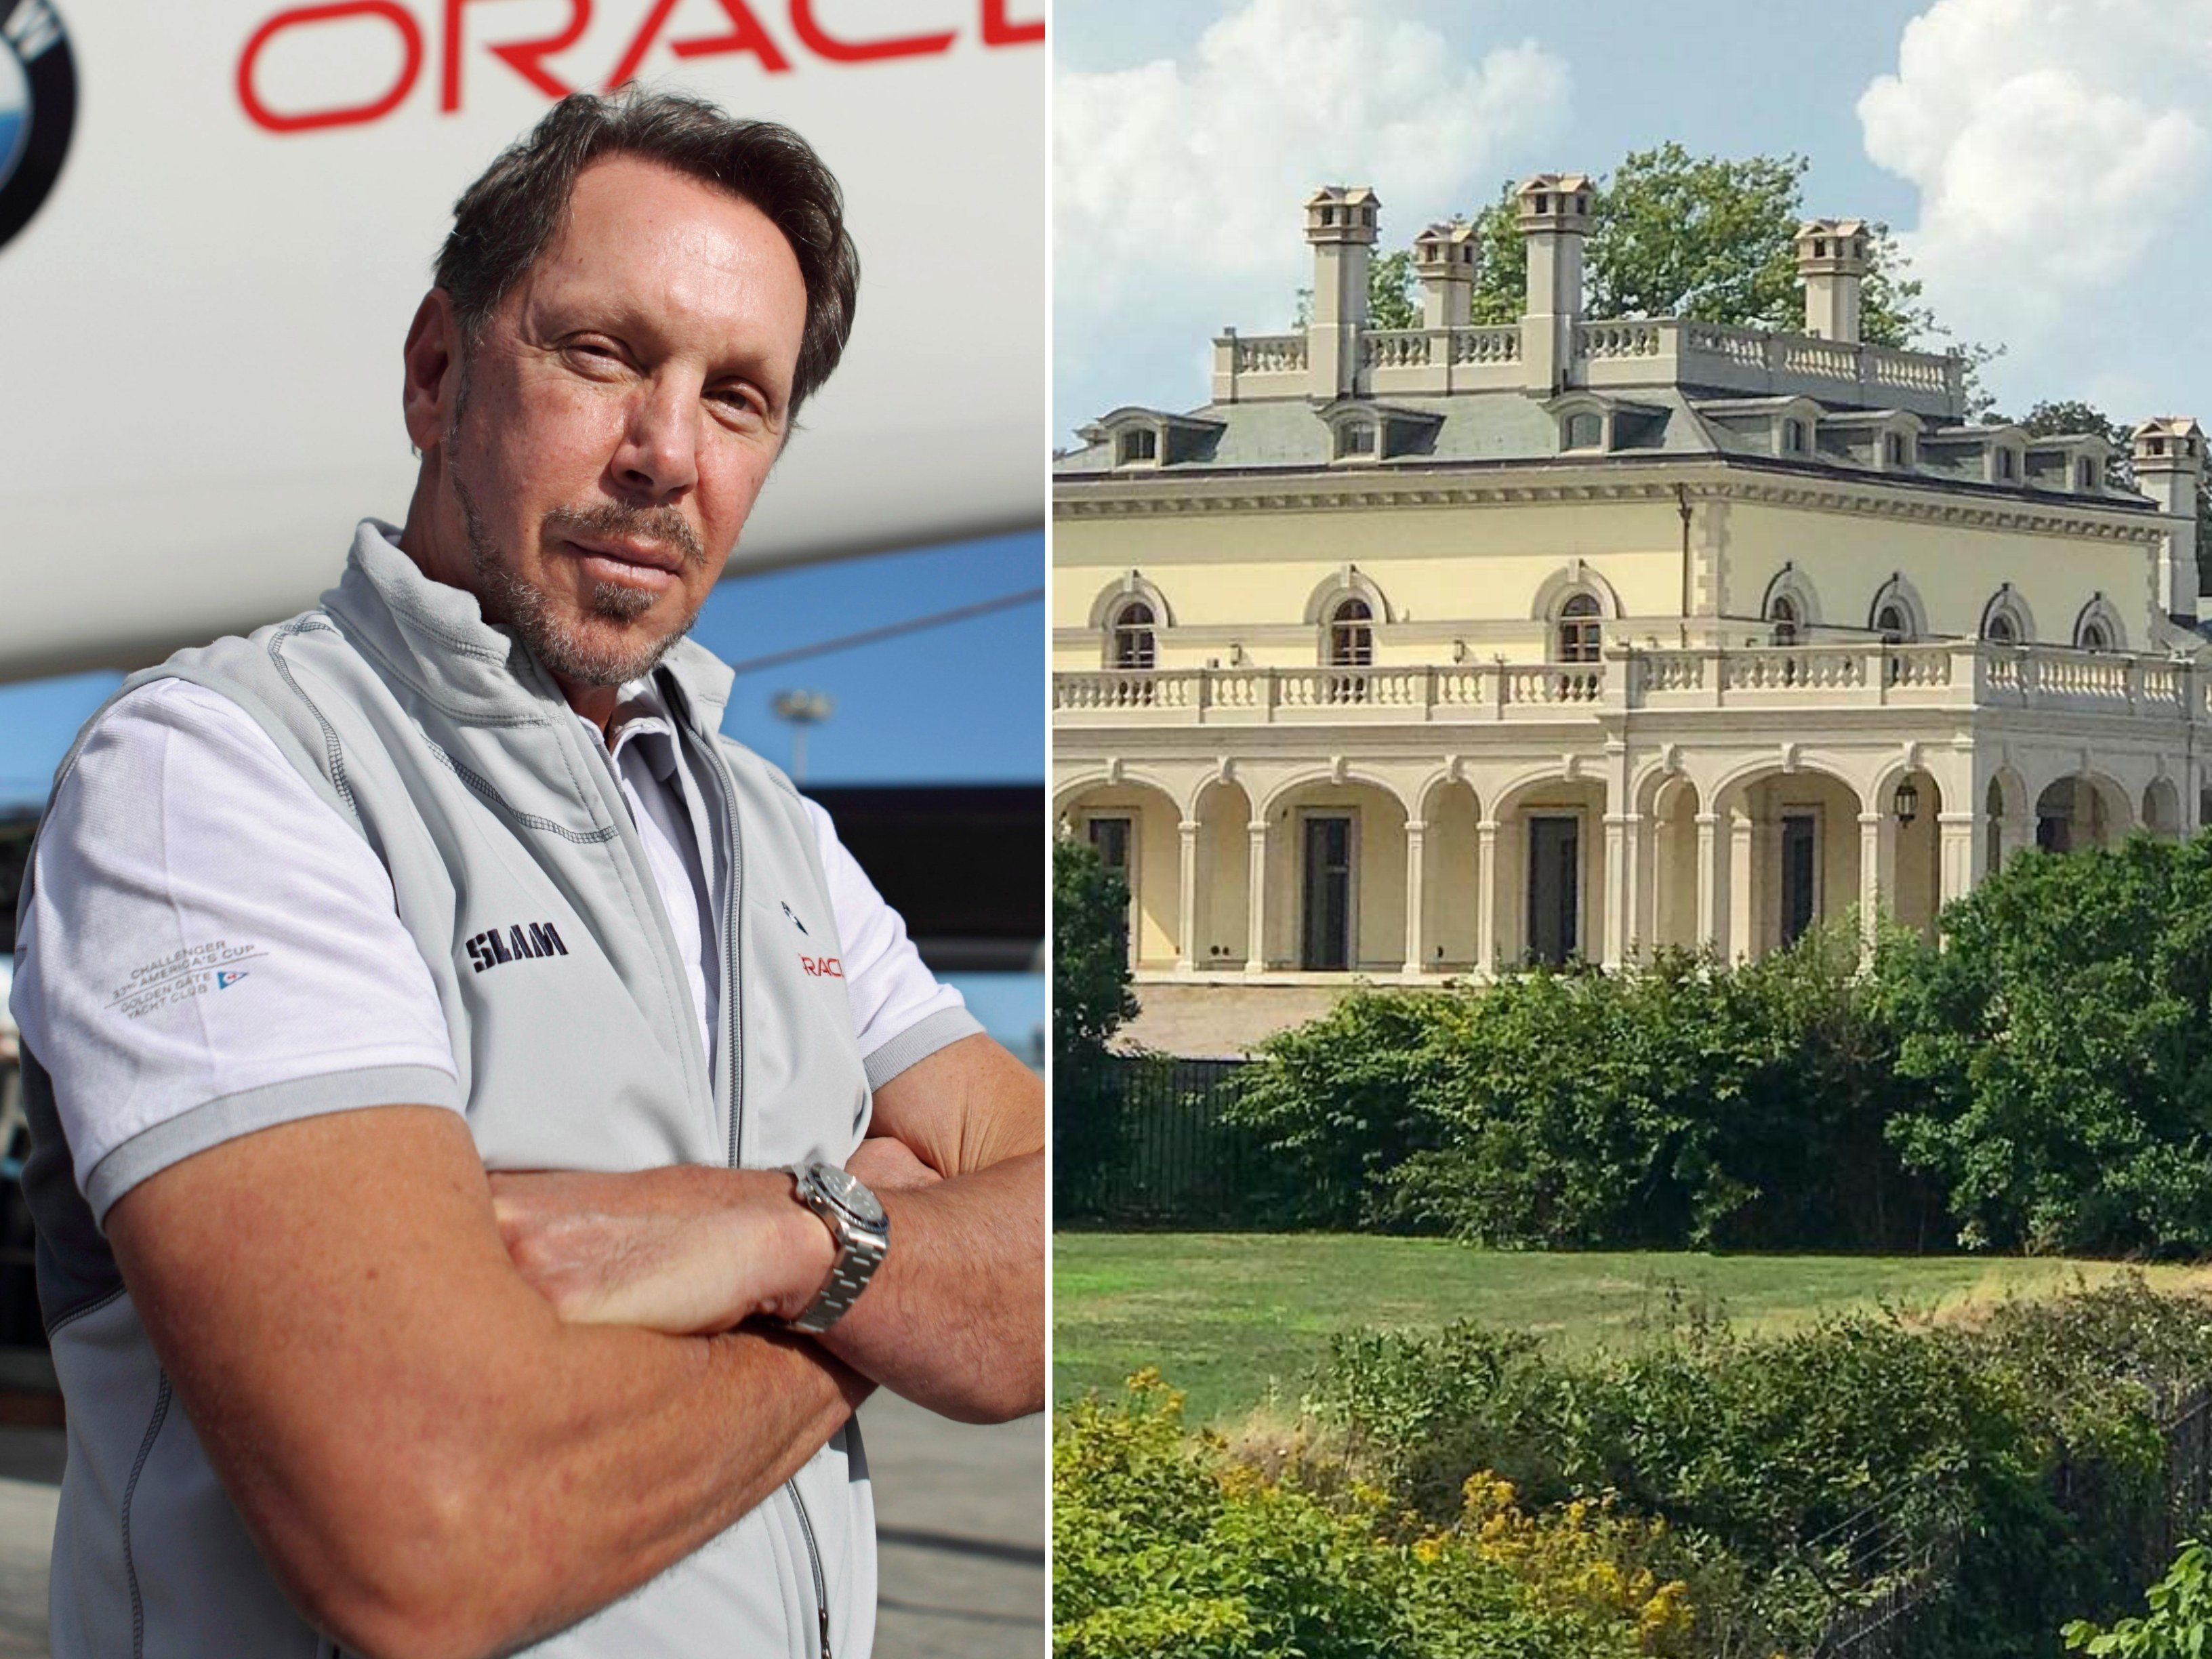 Oracle’s co-founder Larry Ellison has splashed on prime property over the years, from mega mansions to islands. Photos: Handout, AP